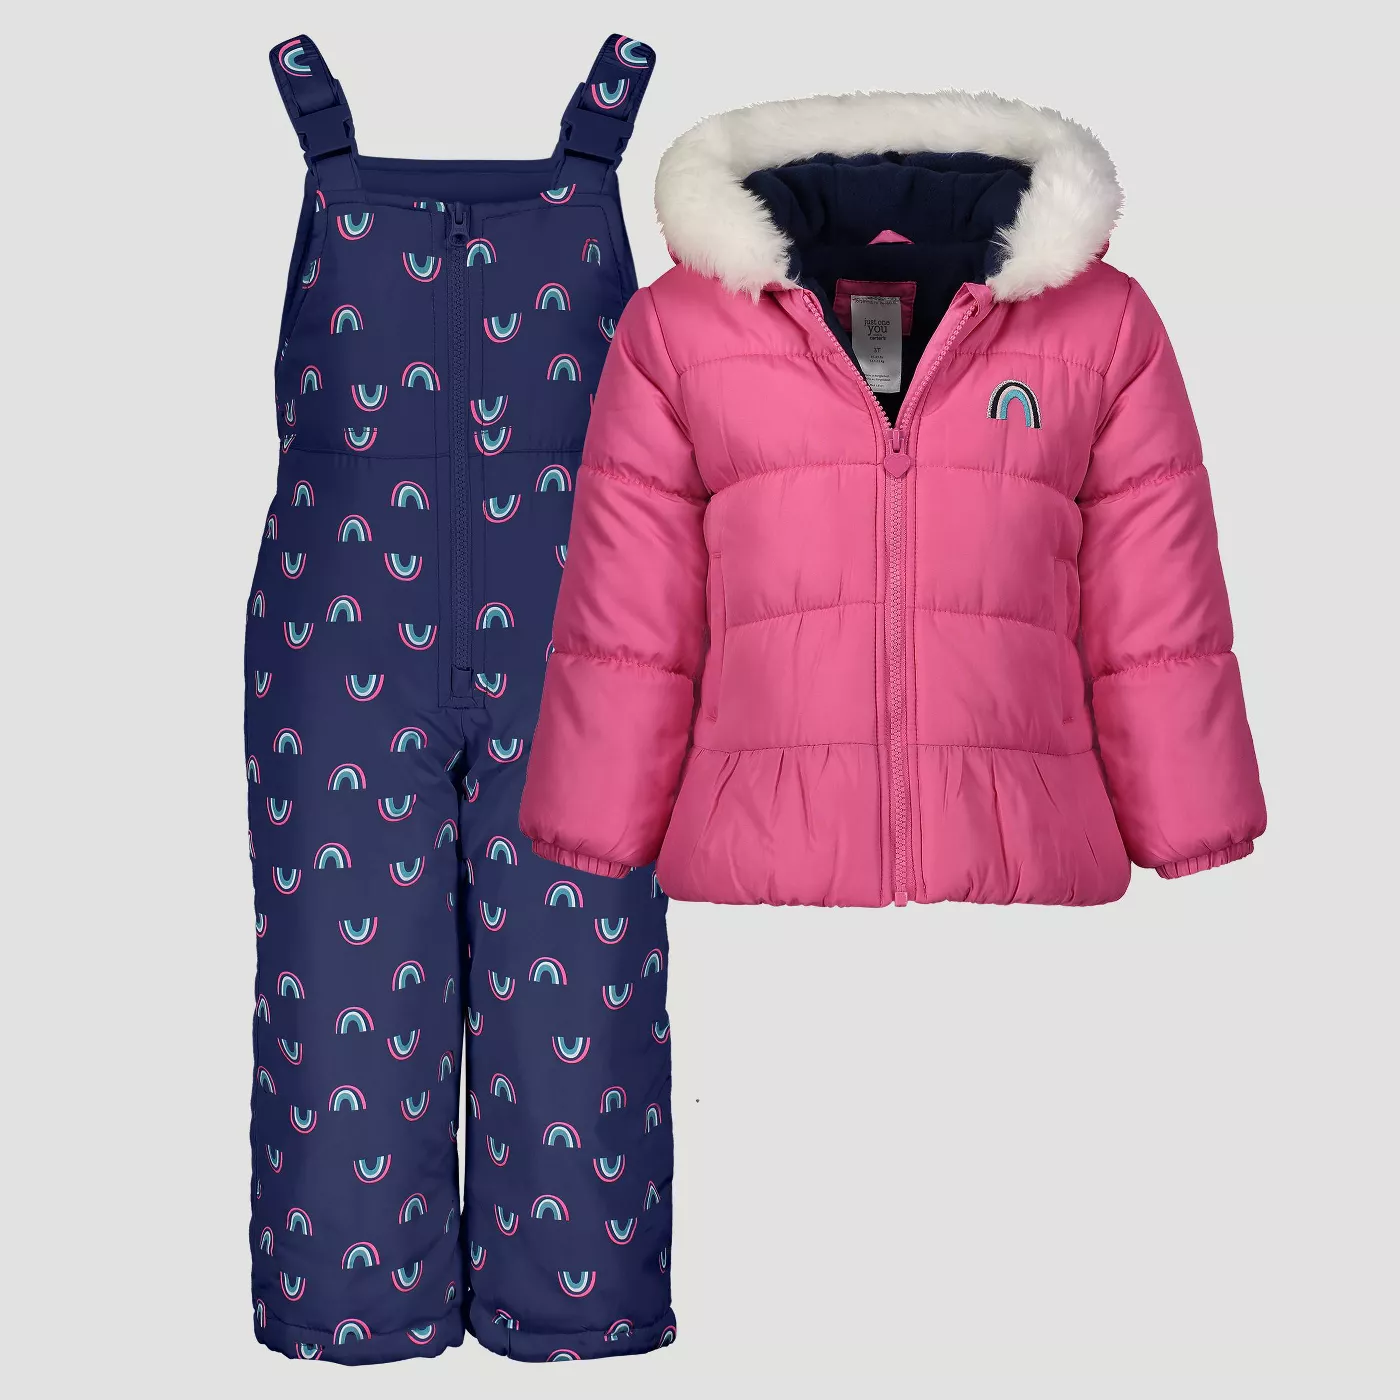 Toddler Girls' Rainbow Snowsuit with Bib - Just One You® made by carter's Dark Pink - image 1 of 1